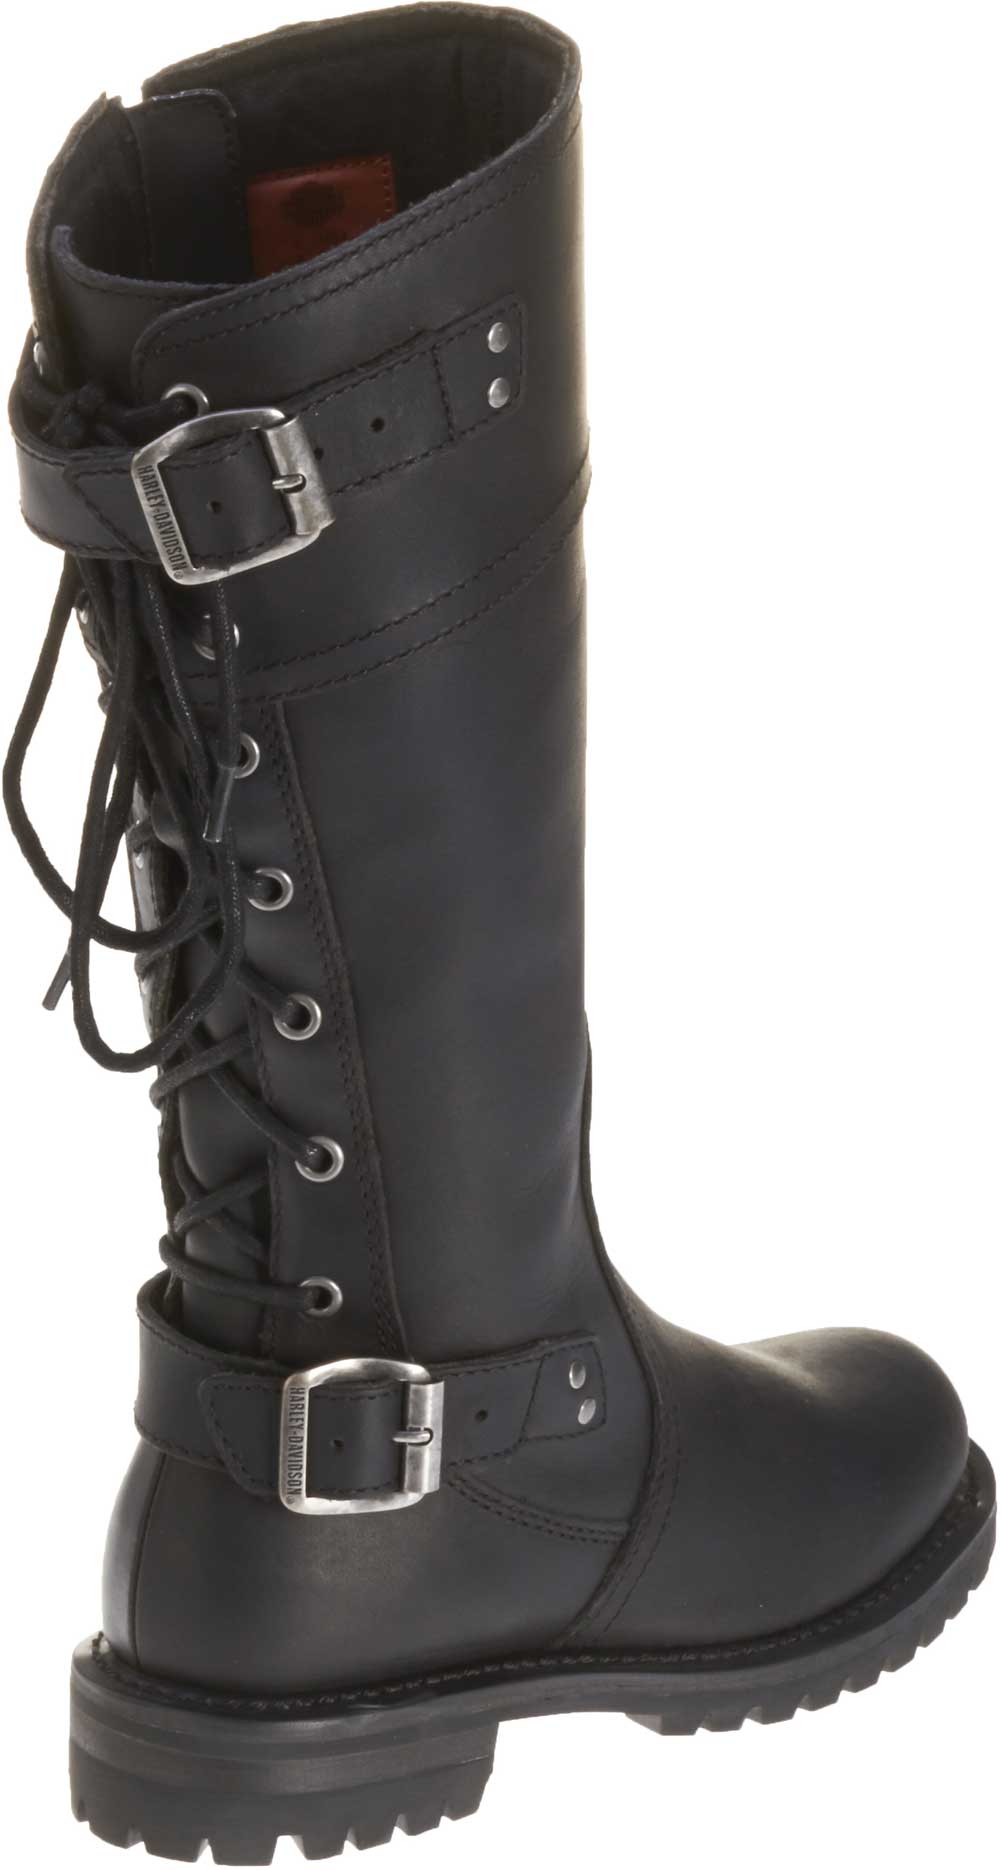 black riding boots with gold hardware